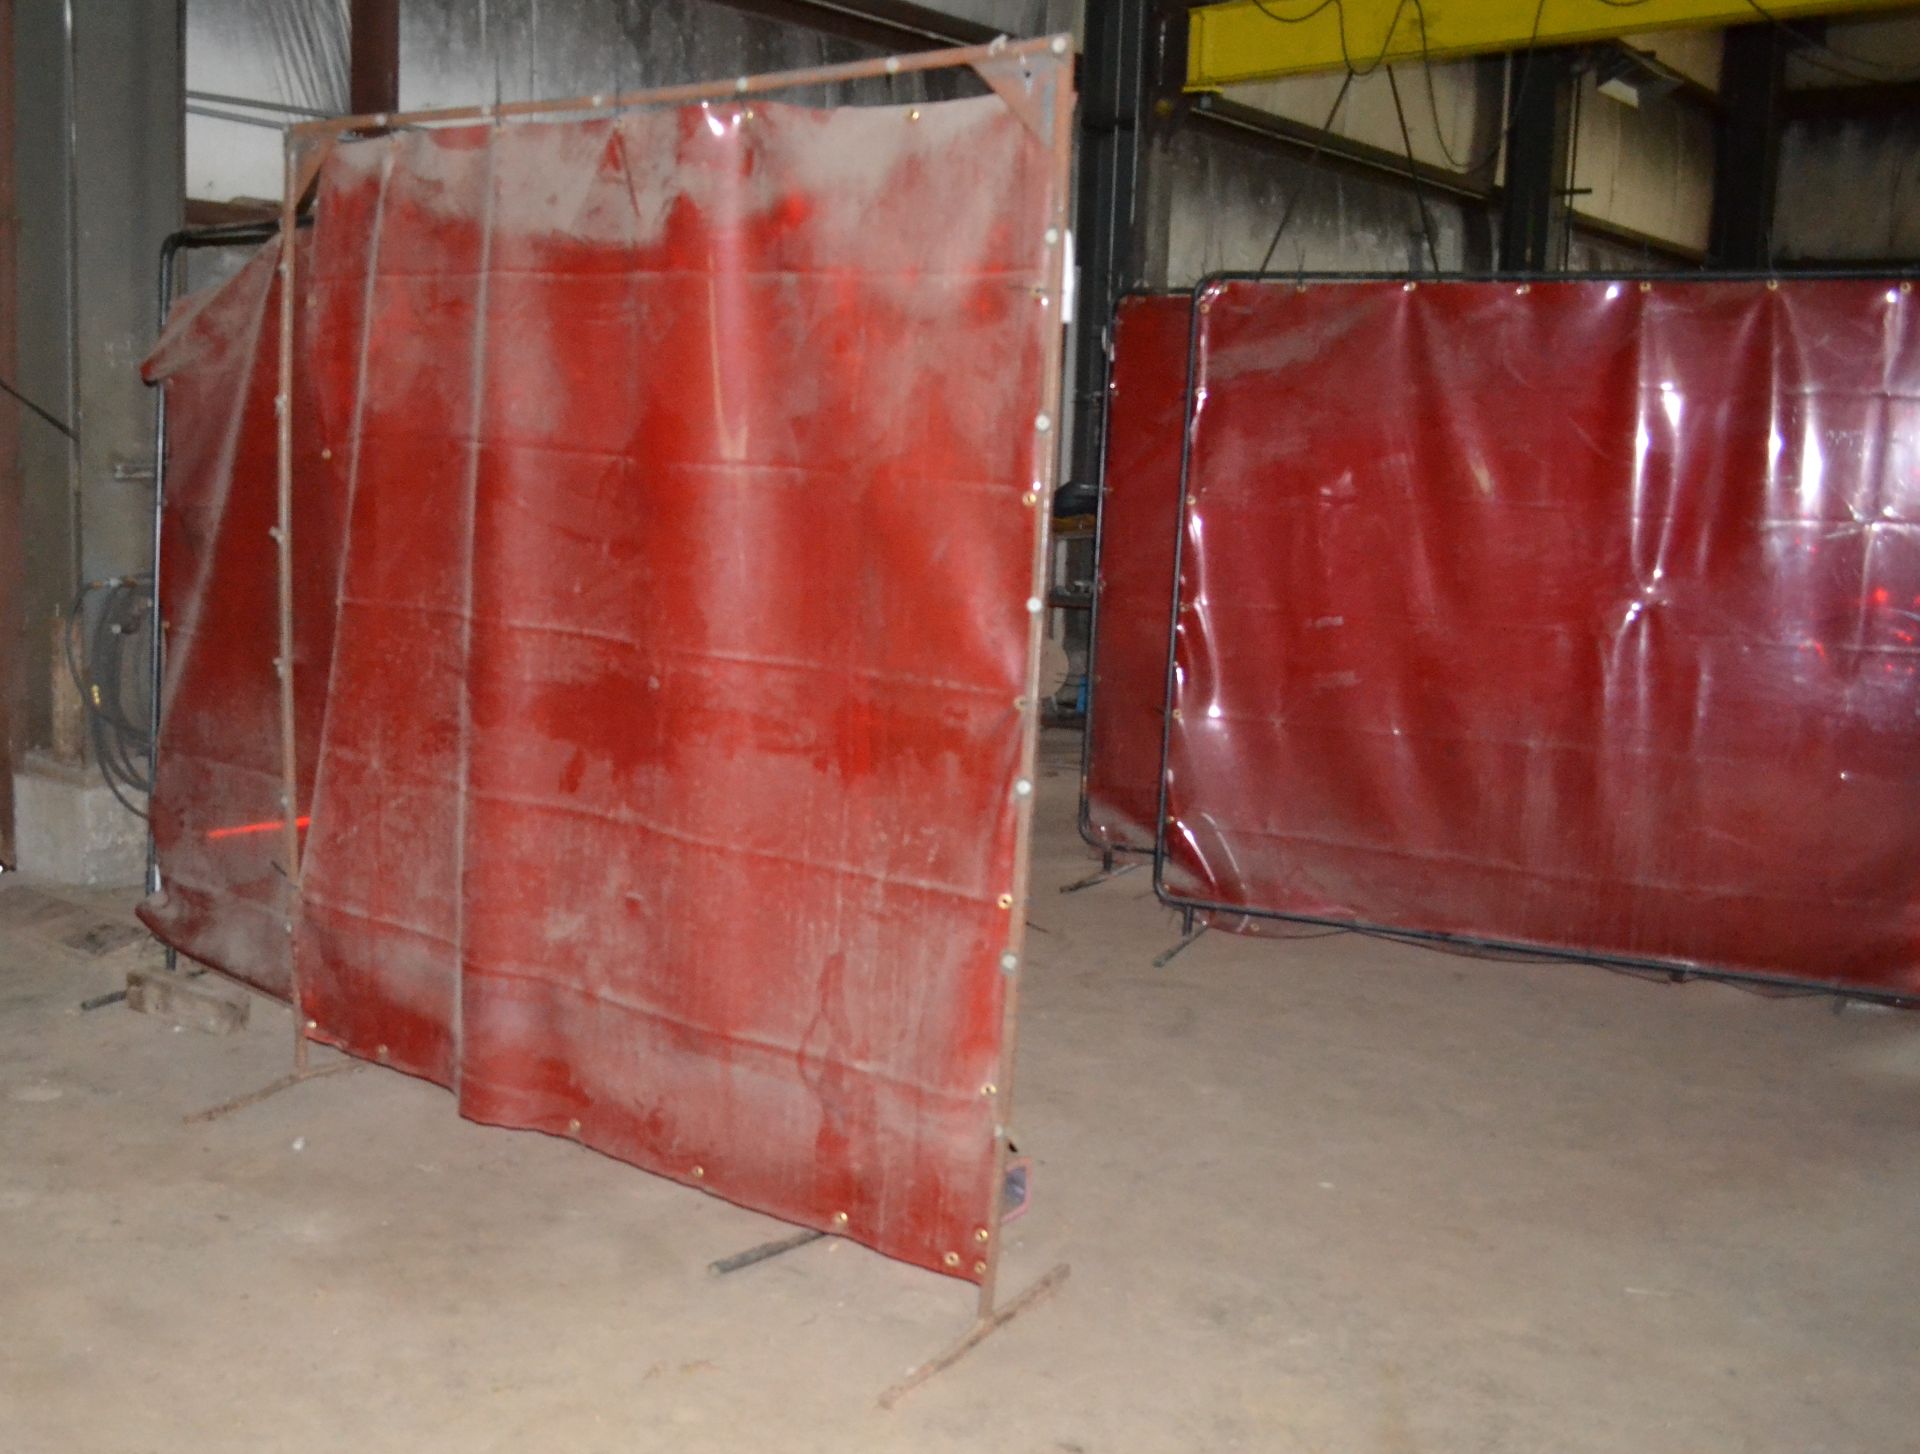 Lot Consisting of (22) Welding Curtains, Various Sizes, Some Need Repair - Image 9 of 11